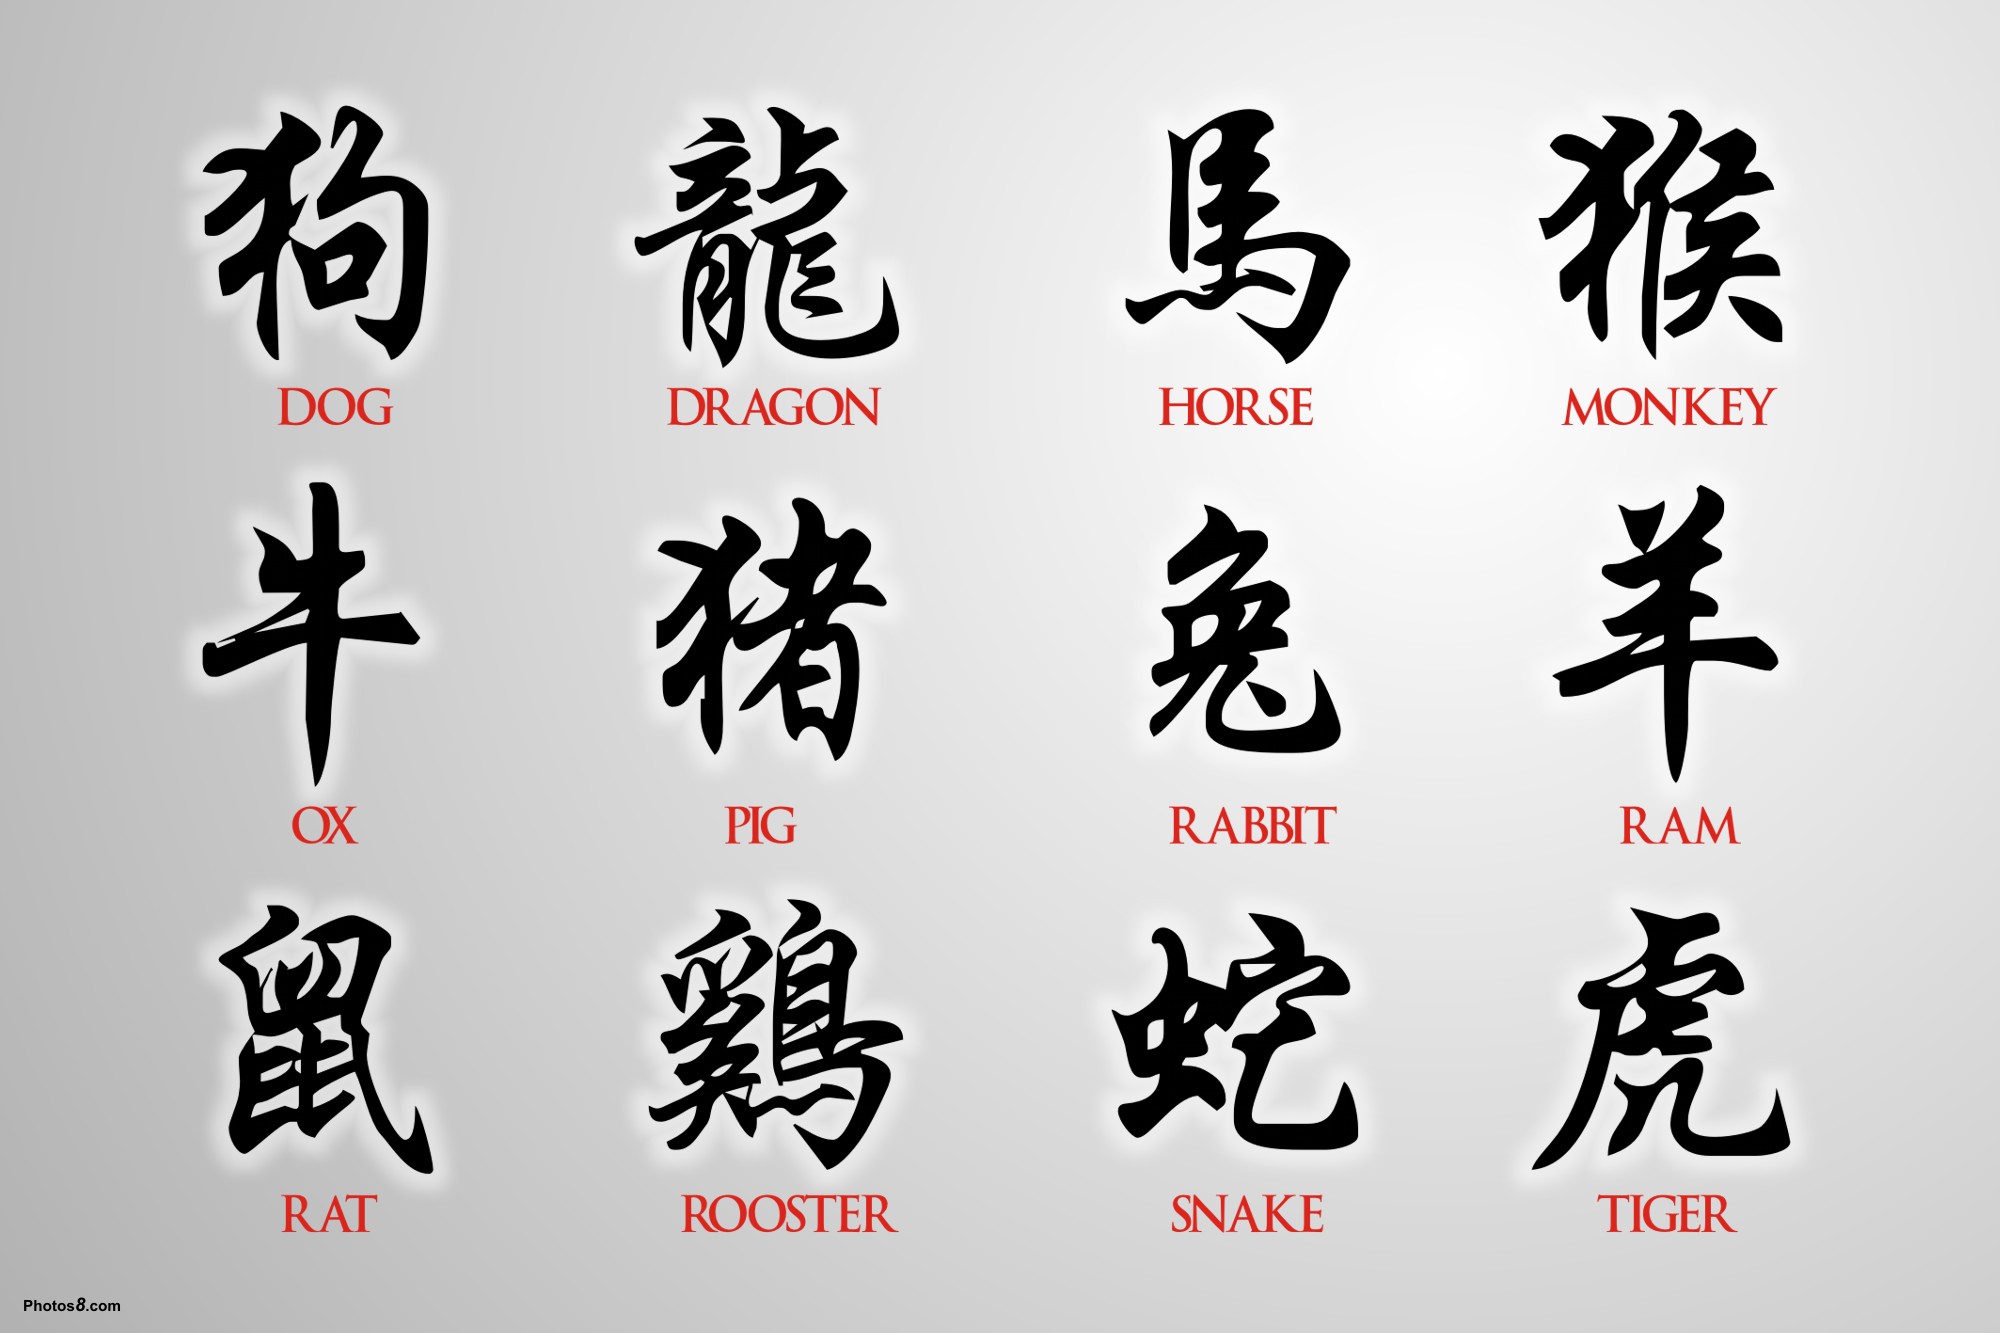 Chinese Zodiac Image Crazy Gallery